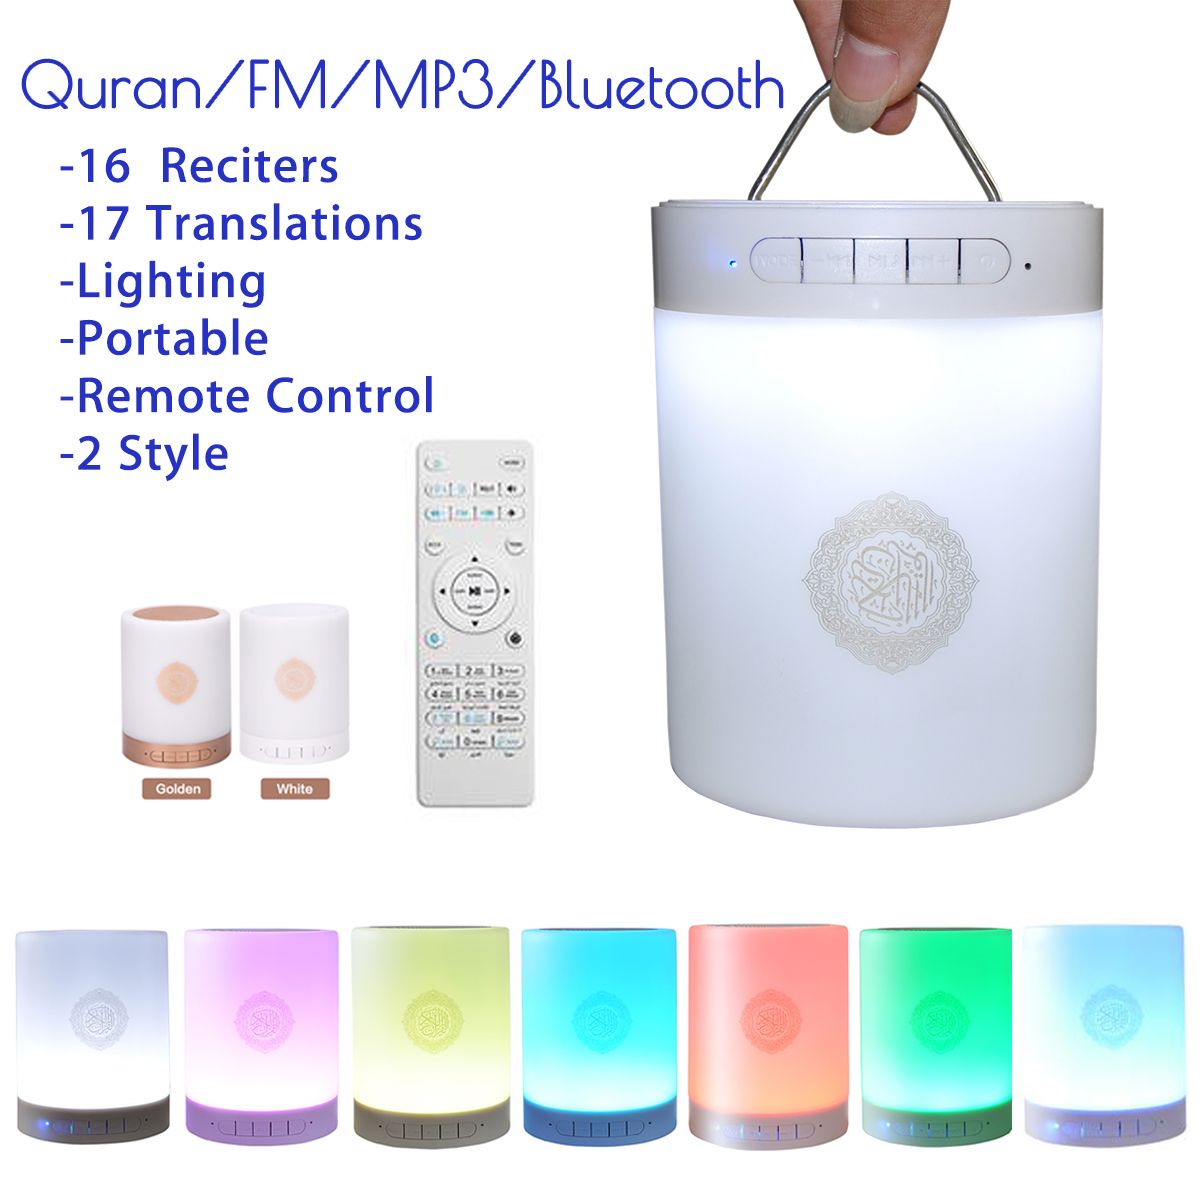 Quran-Portable-bluetooth-Speaker-Remote-Control-LED-Touch-Lamp-TF-Card-FM-Radio-Headset-Speaker-1368419